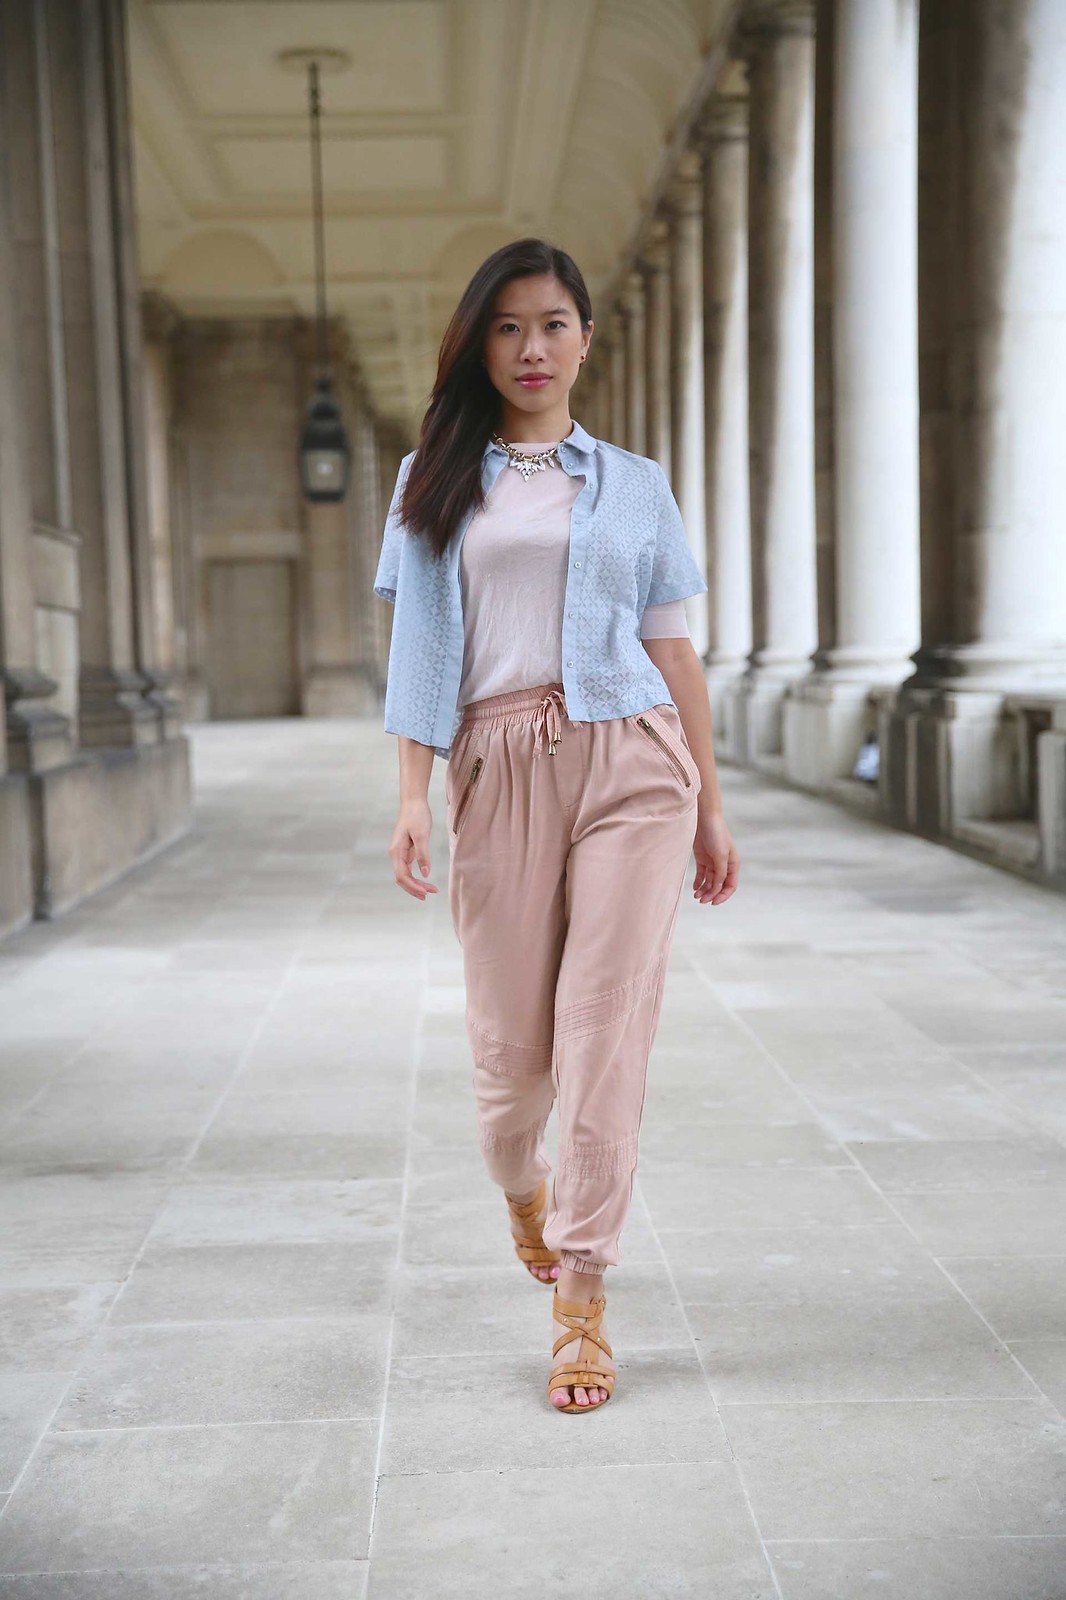 The Return Of Romance With Pastels!